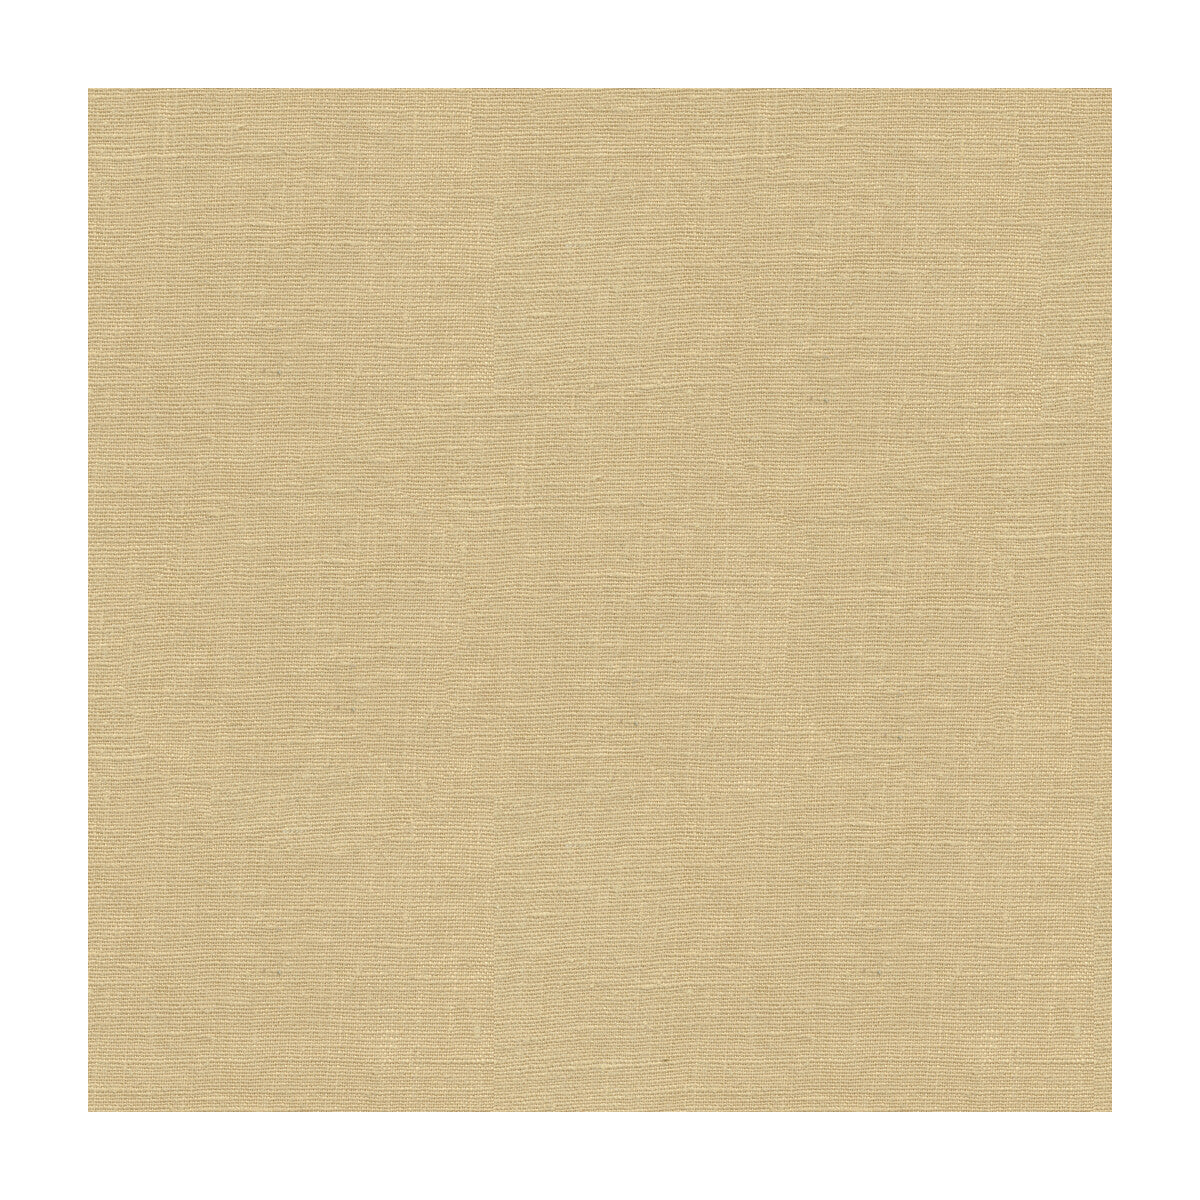 Dublin fabric in almond color - pattern 32344.16.0 - by Kravet Basics in the Perfect Plains collection